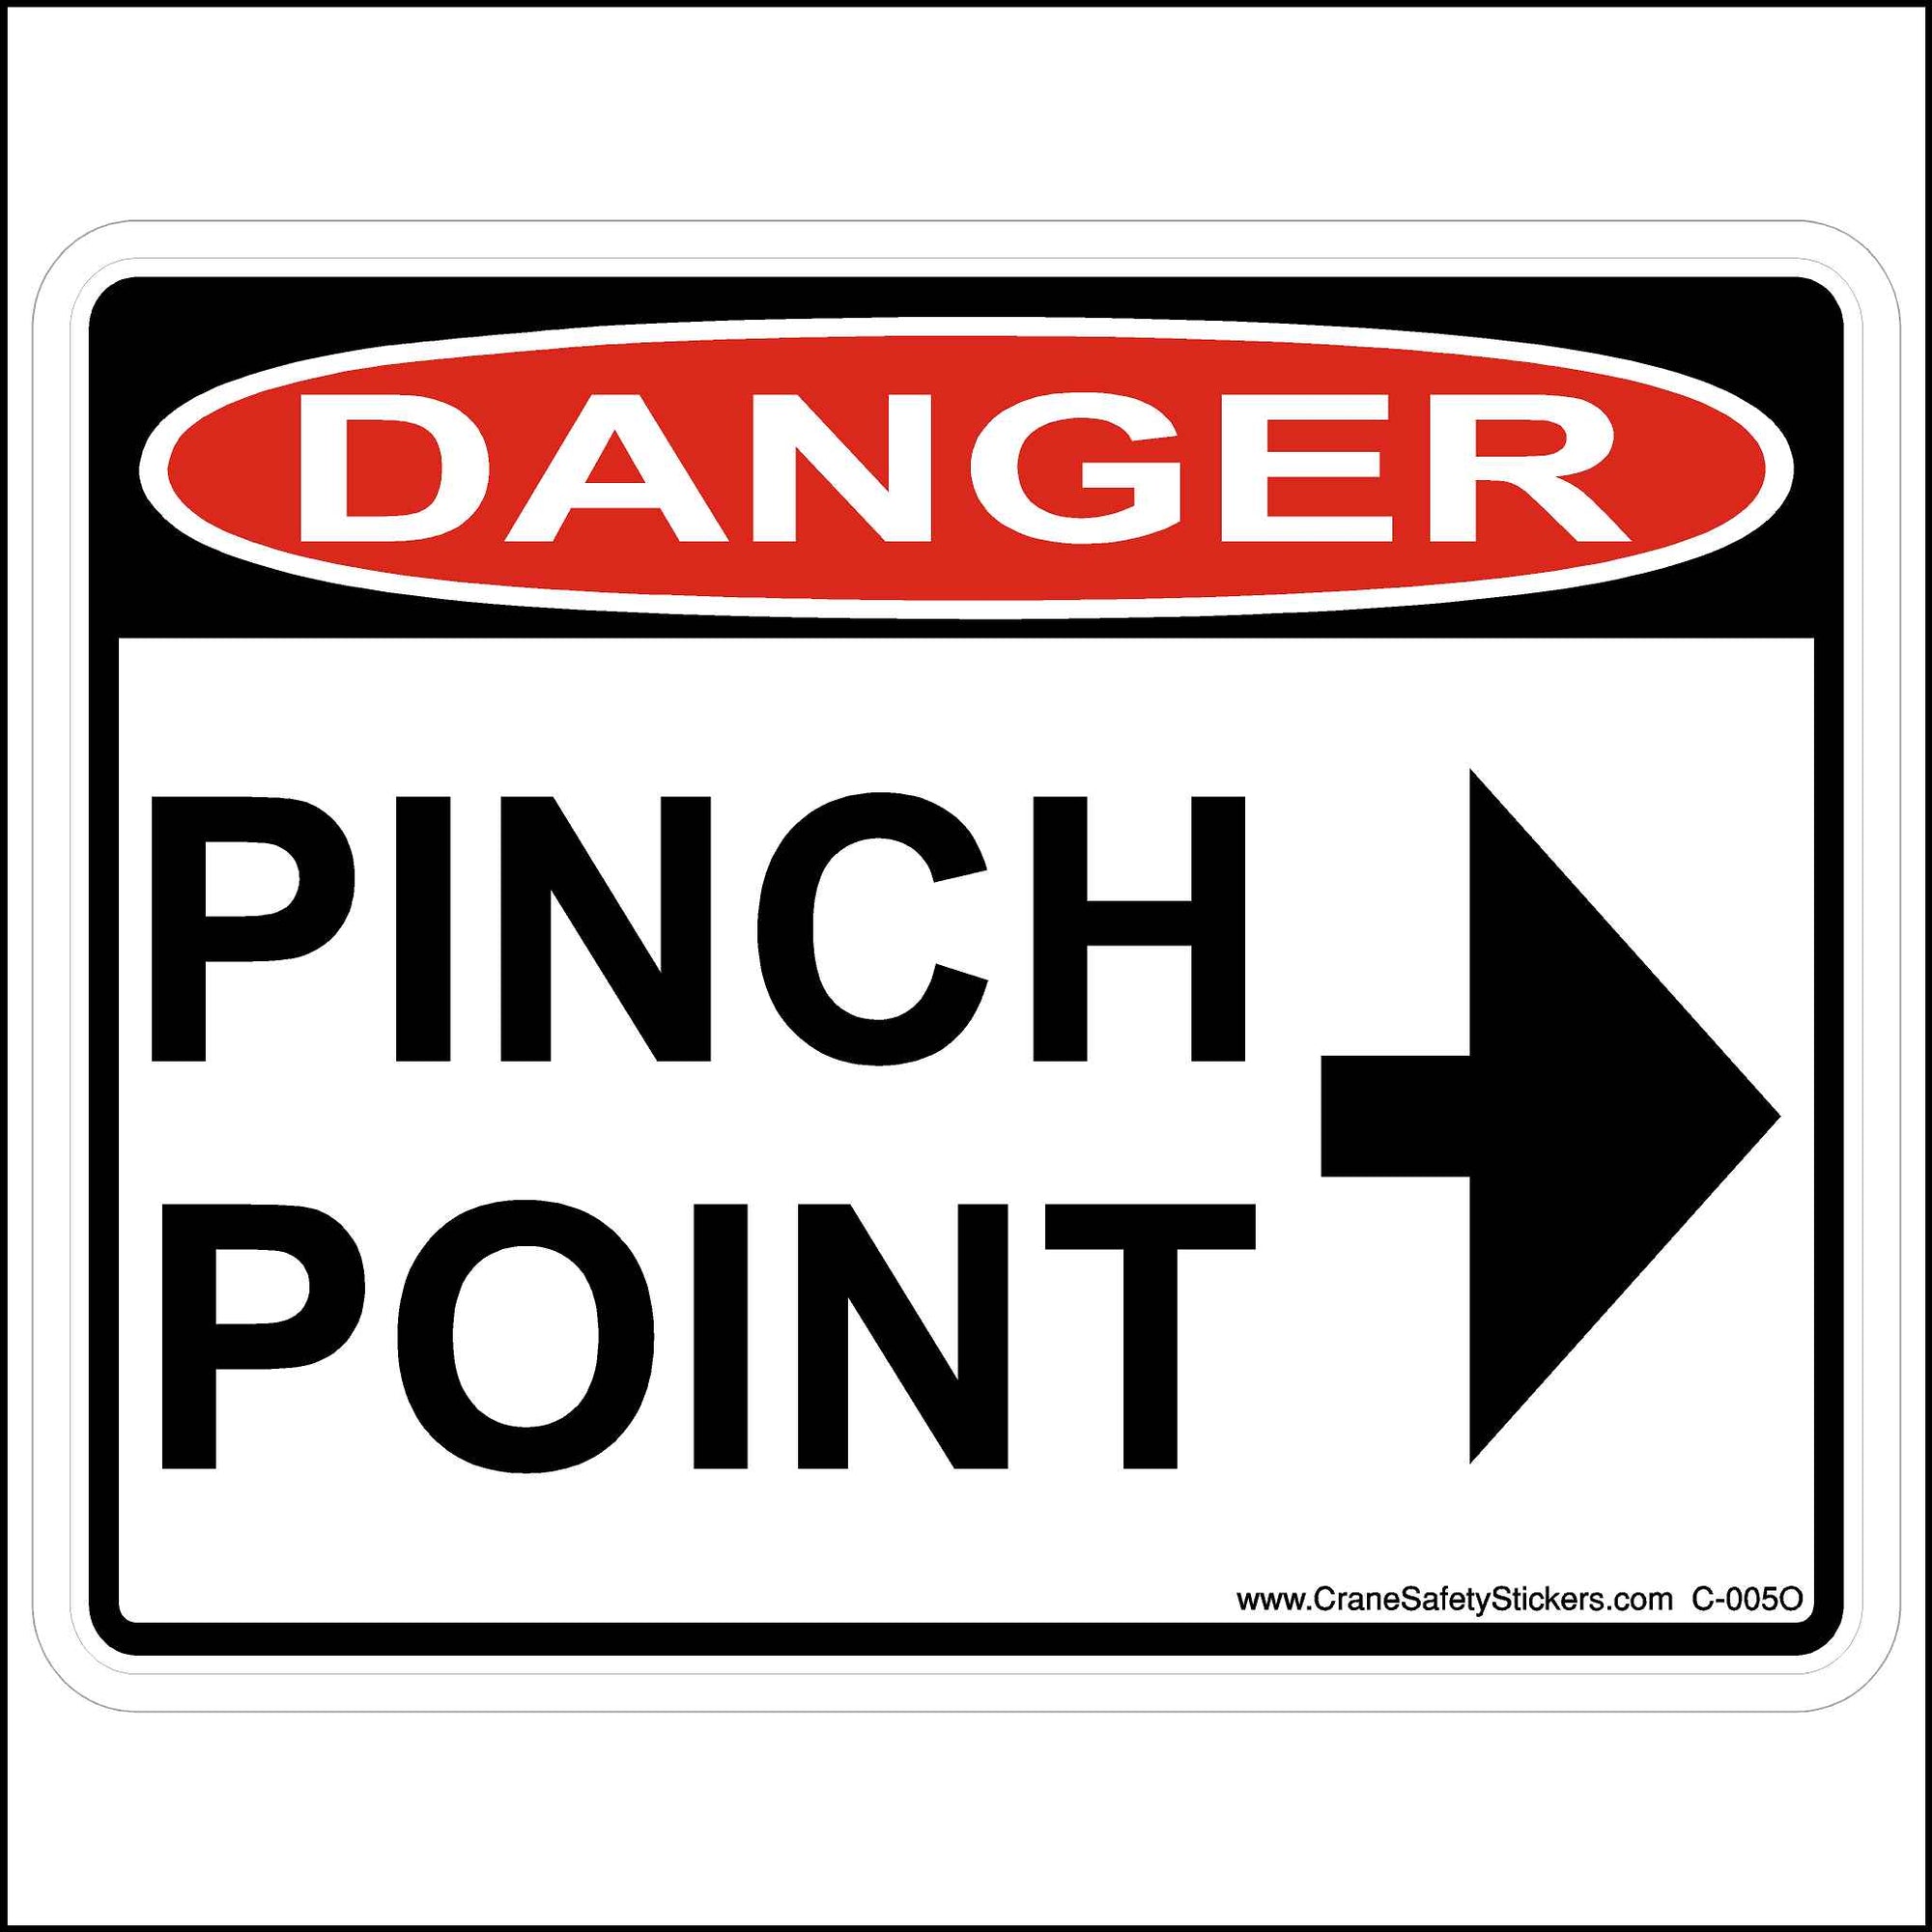 Red White and Black OSHA Pinch Point Sticker With An Arrow Pointing Right.